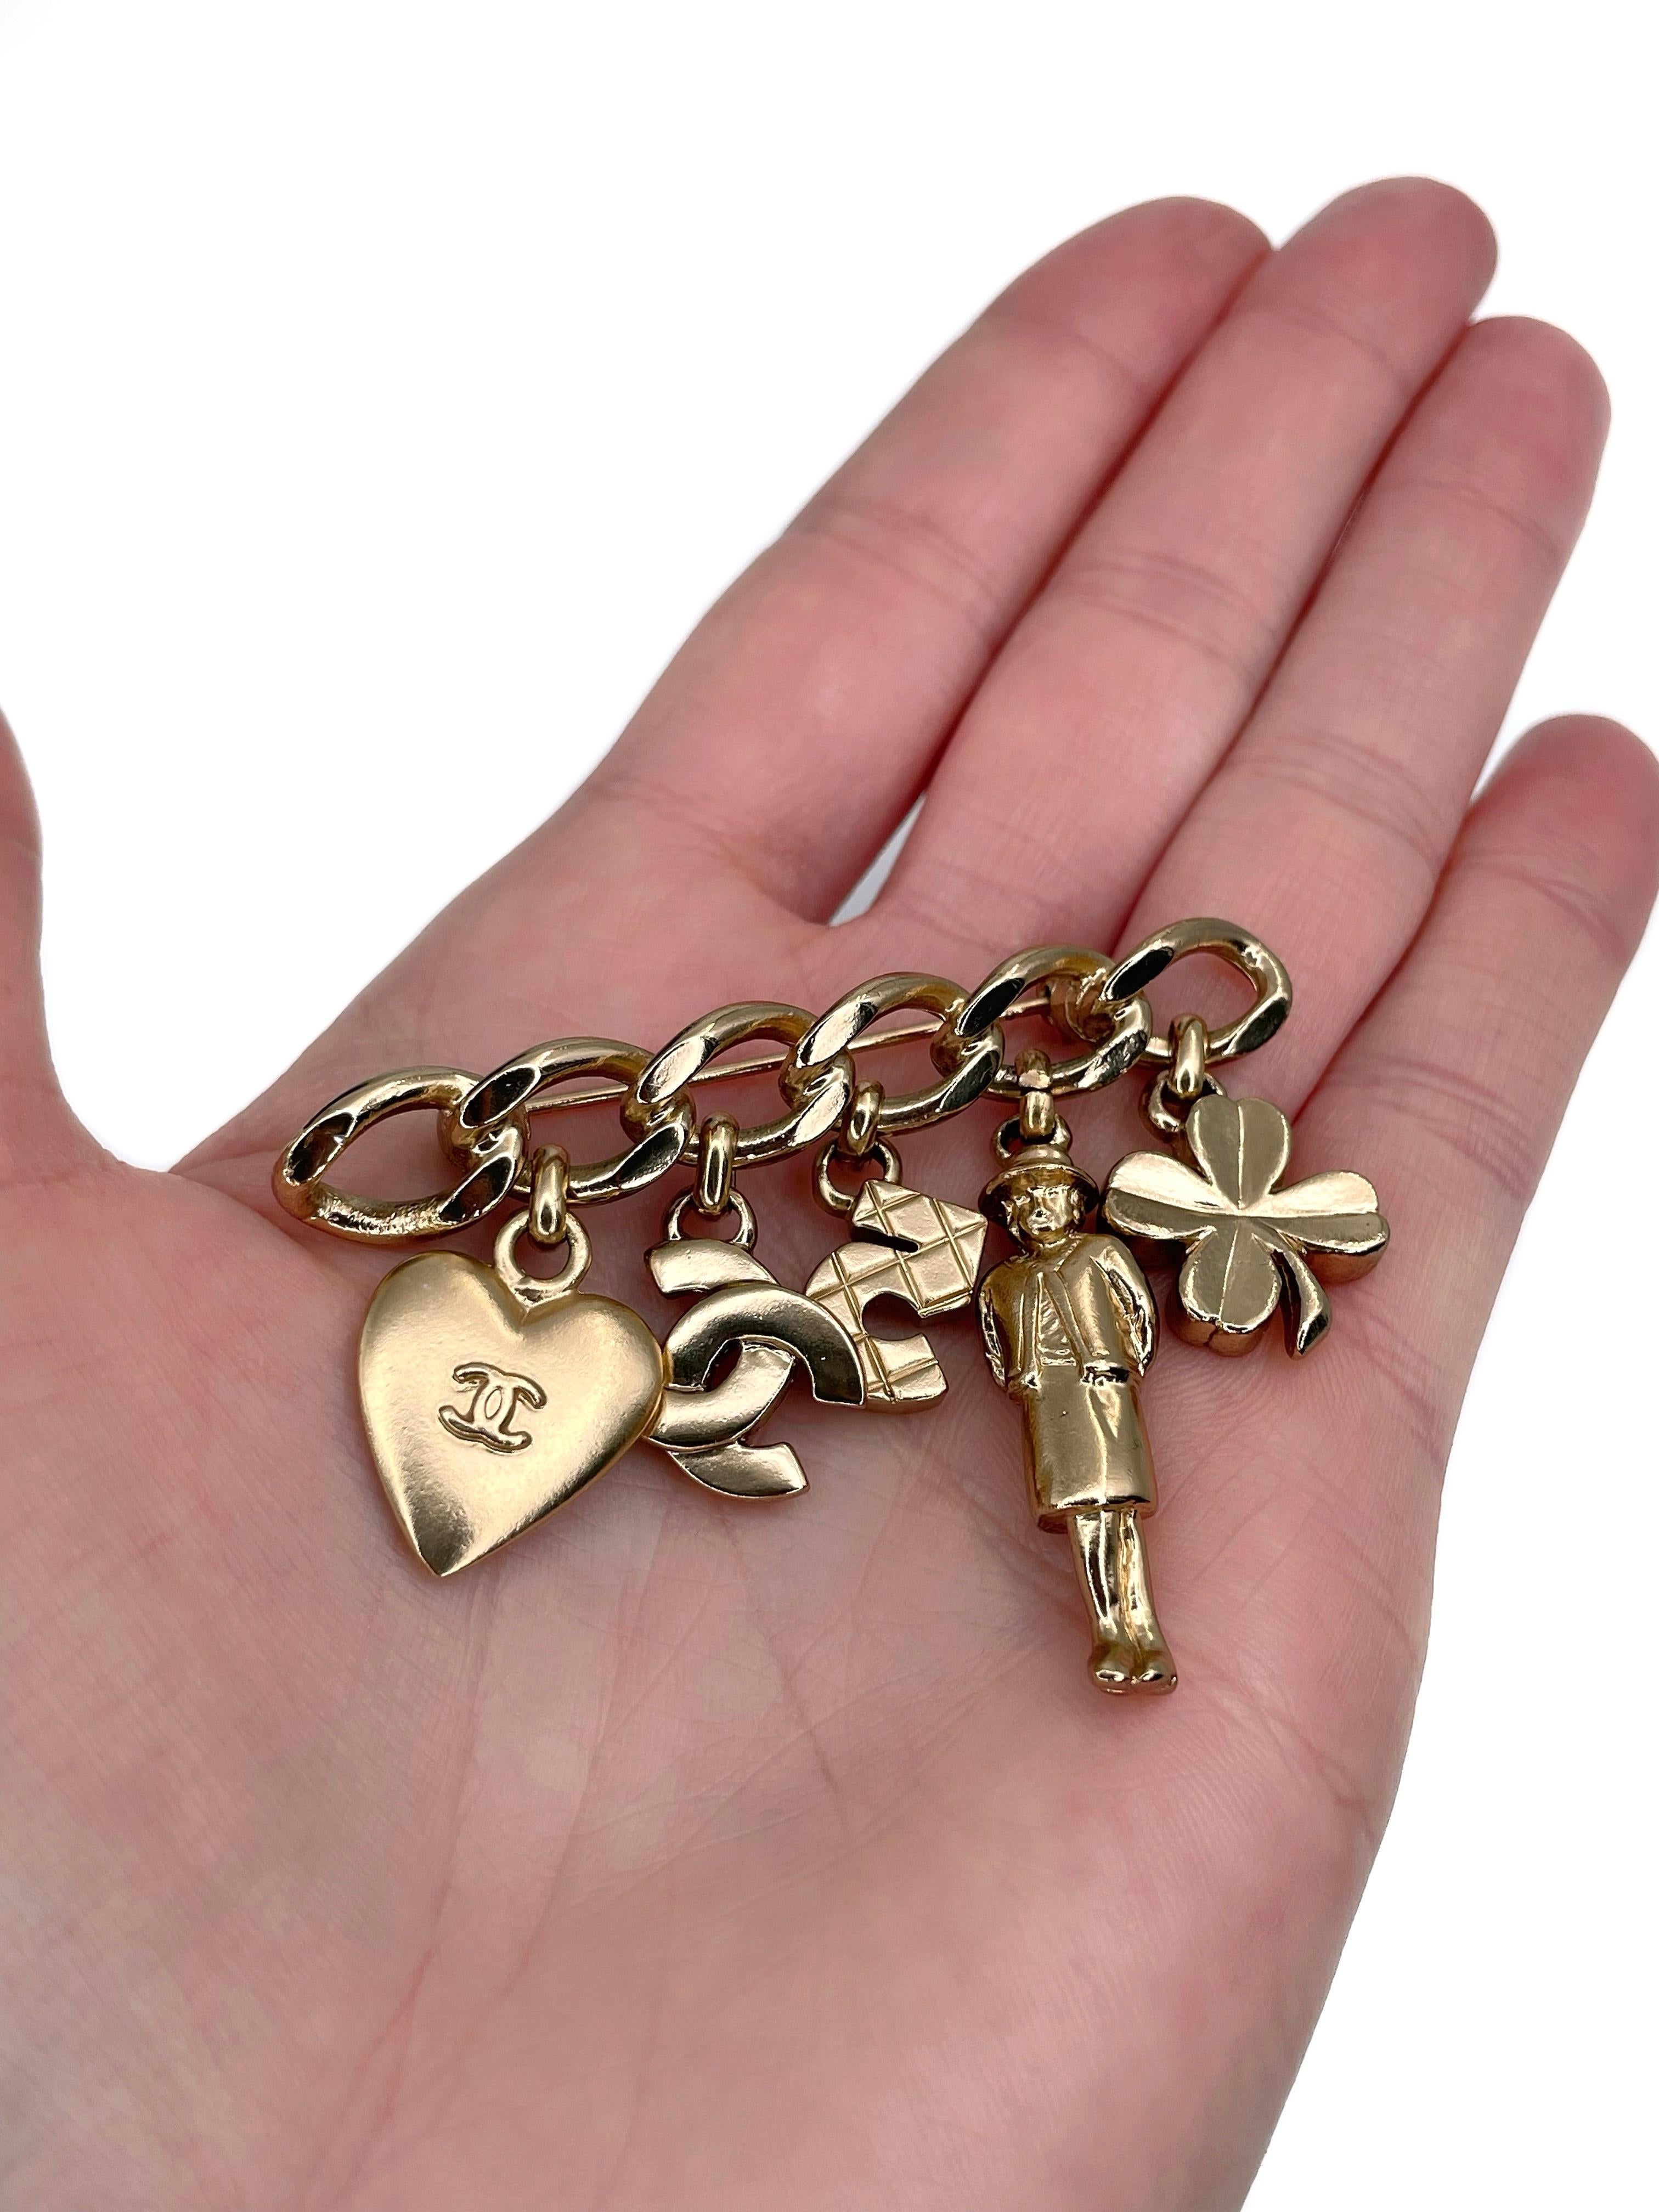 This is a charm bar brooch designed by Chanel for 2002 collection. The piece is gold plated. It features heart, CC logo, number five, madame Coco, clover charms. 

Signed: ©Chanel® 02P. Made in France

Bar length: 6cm
Width (at max): 4.5cm

———

If